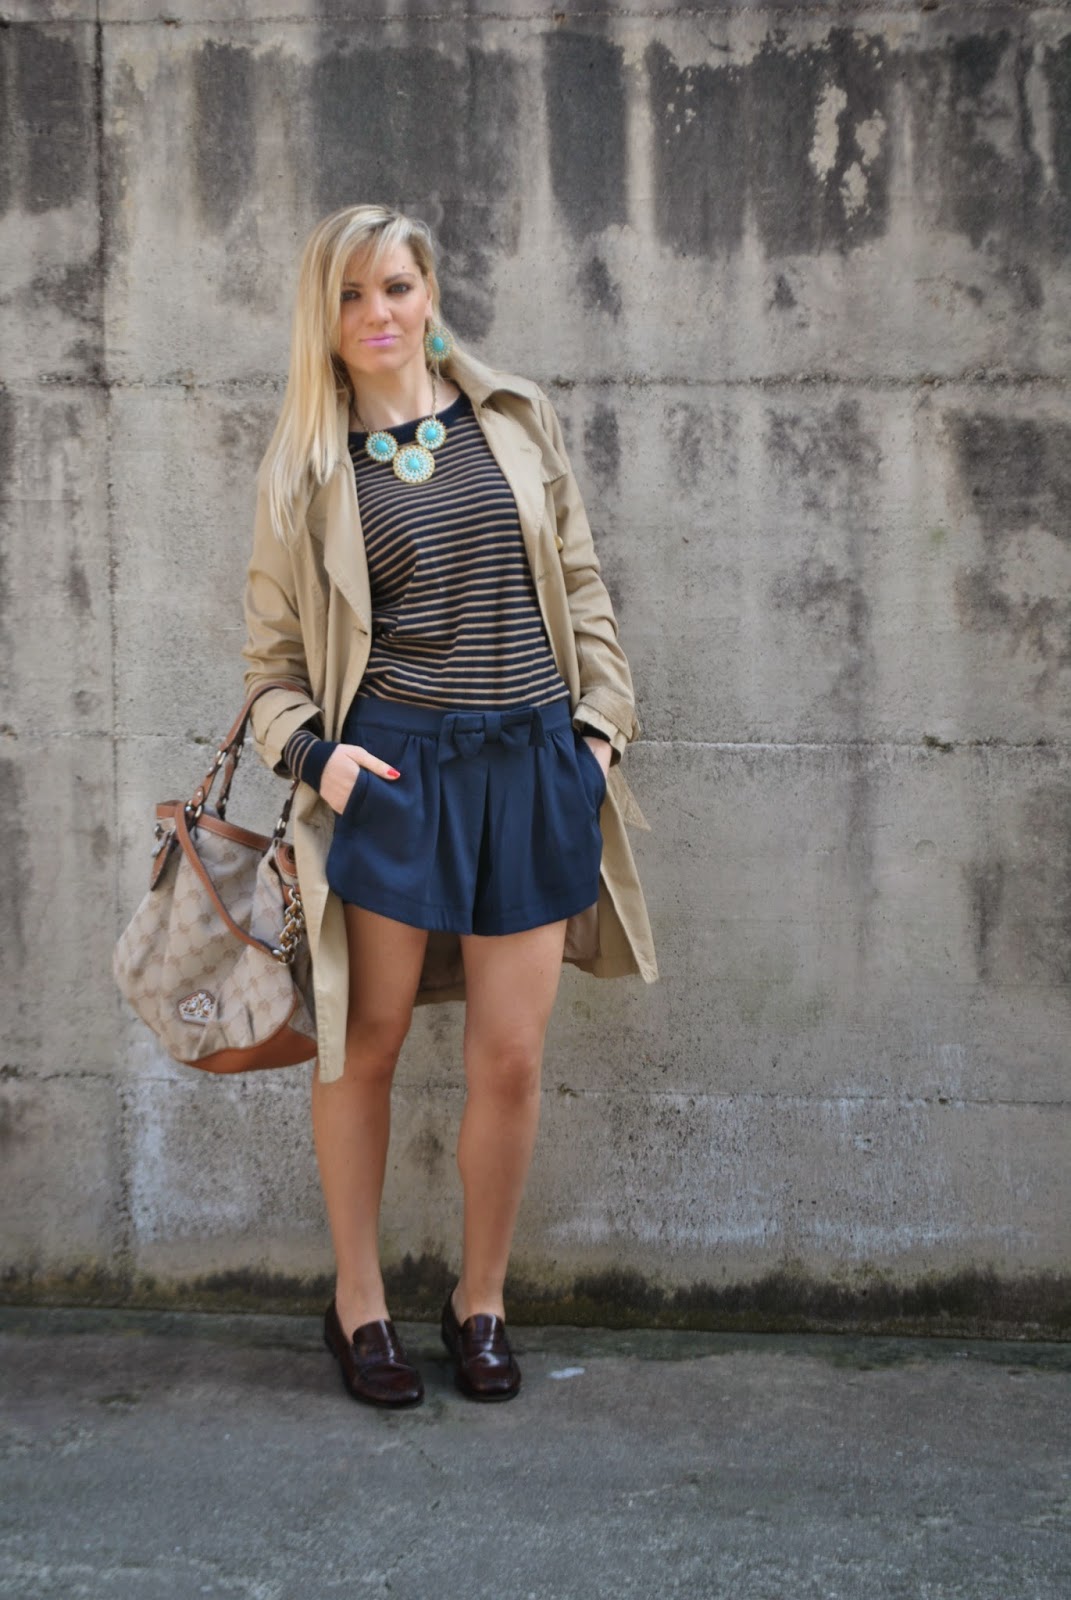 outfit trench beige come abbinare il trench outfit blu mariafelicia magno colorblock by felym mariafelicia magno fashion blogger come abbinare il blu outfit borsa marrone outfit shorts blu outfit a righe outfit maglione a righe outfit primaverili casual outfit primaverili donna outfit aprile 2015 outfit a righe come abbinare le righe  spring outfit trench outfit blue outfit how to wear trench how to wear blue how to wear stripes fashion blogger italiane fashion blog italiani ragazze bionde fashion bloggers italy blonde hair blonde girl mac cosmetics rossetto rosa mac cosmetics mac cosmetics lipstick mango sisley pimkie fornarina lumberjack